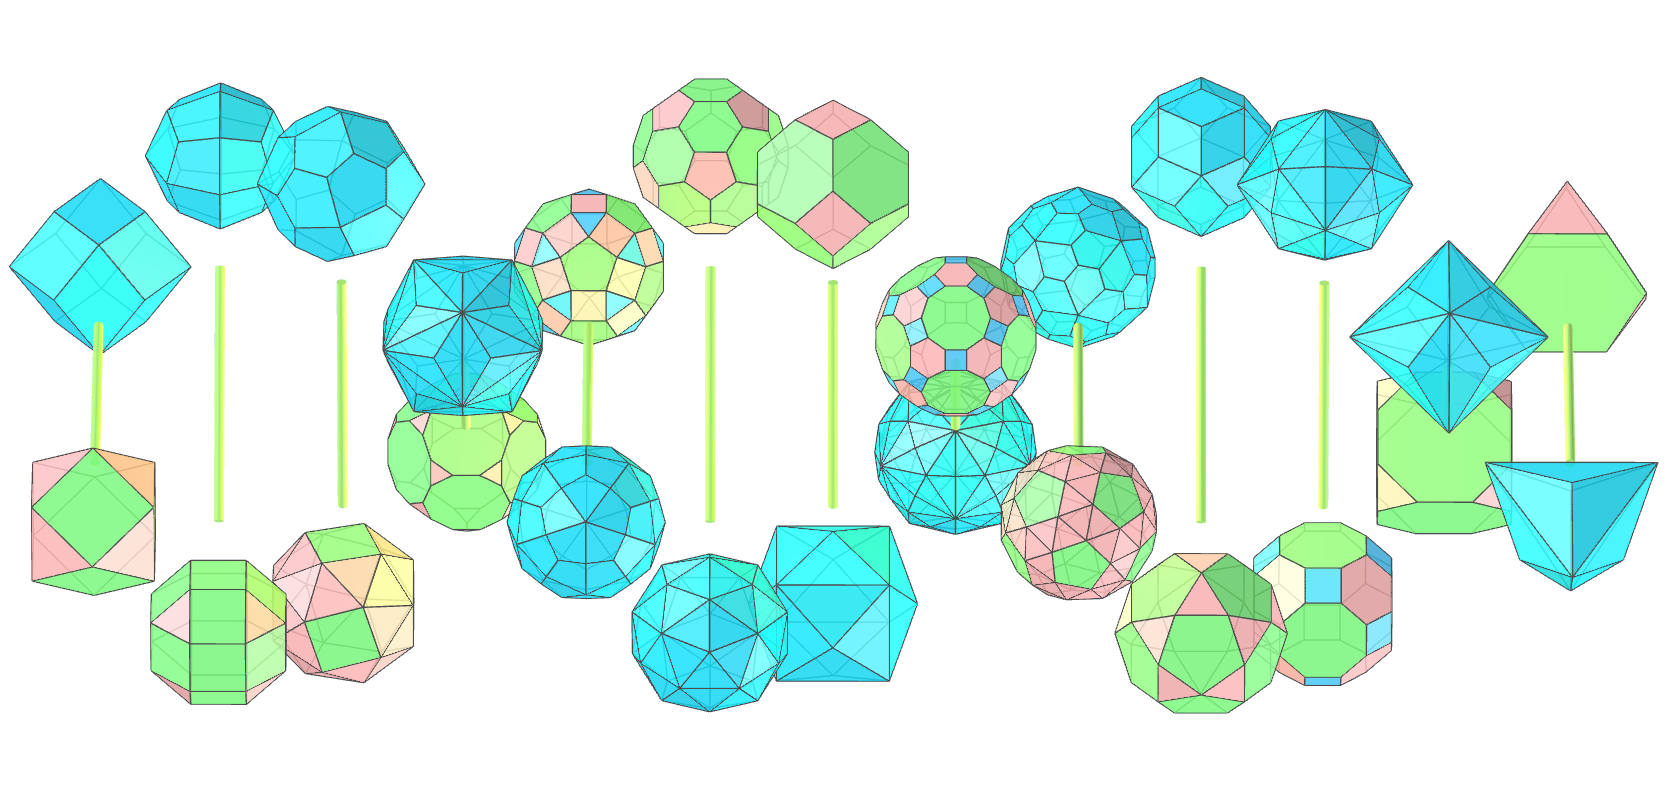 Archimedean polyhedra and their Catalan duals